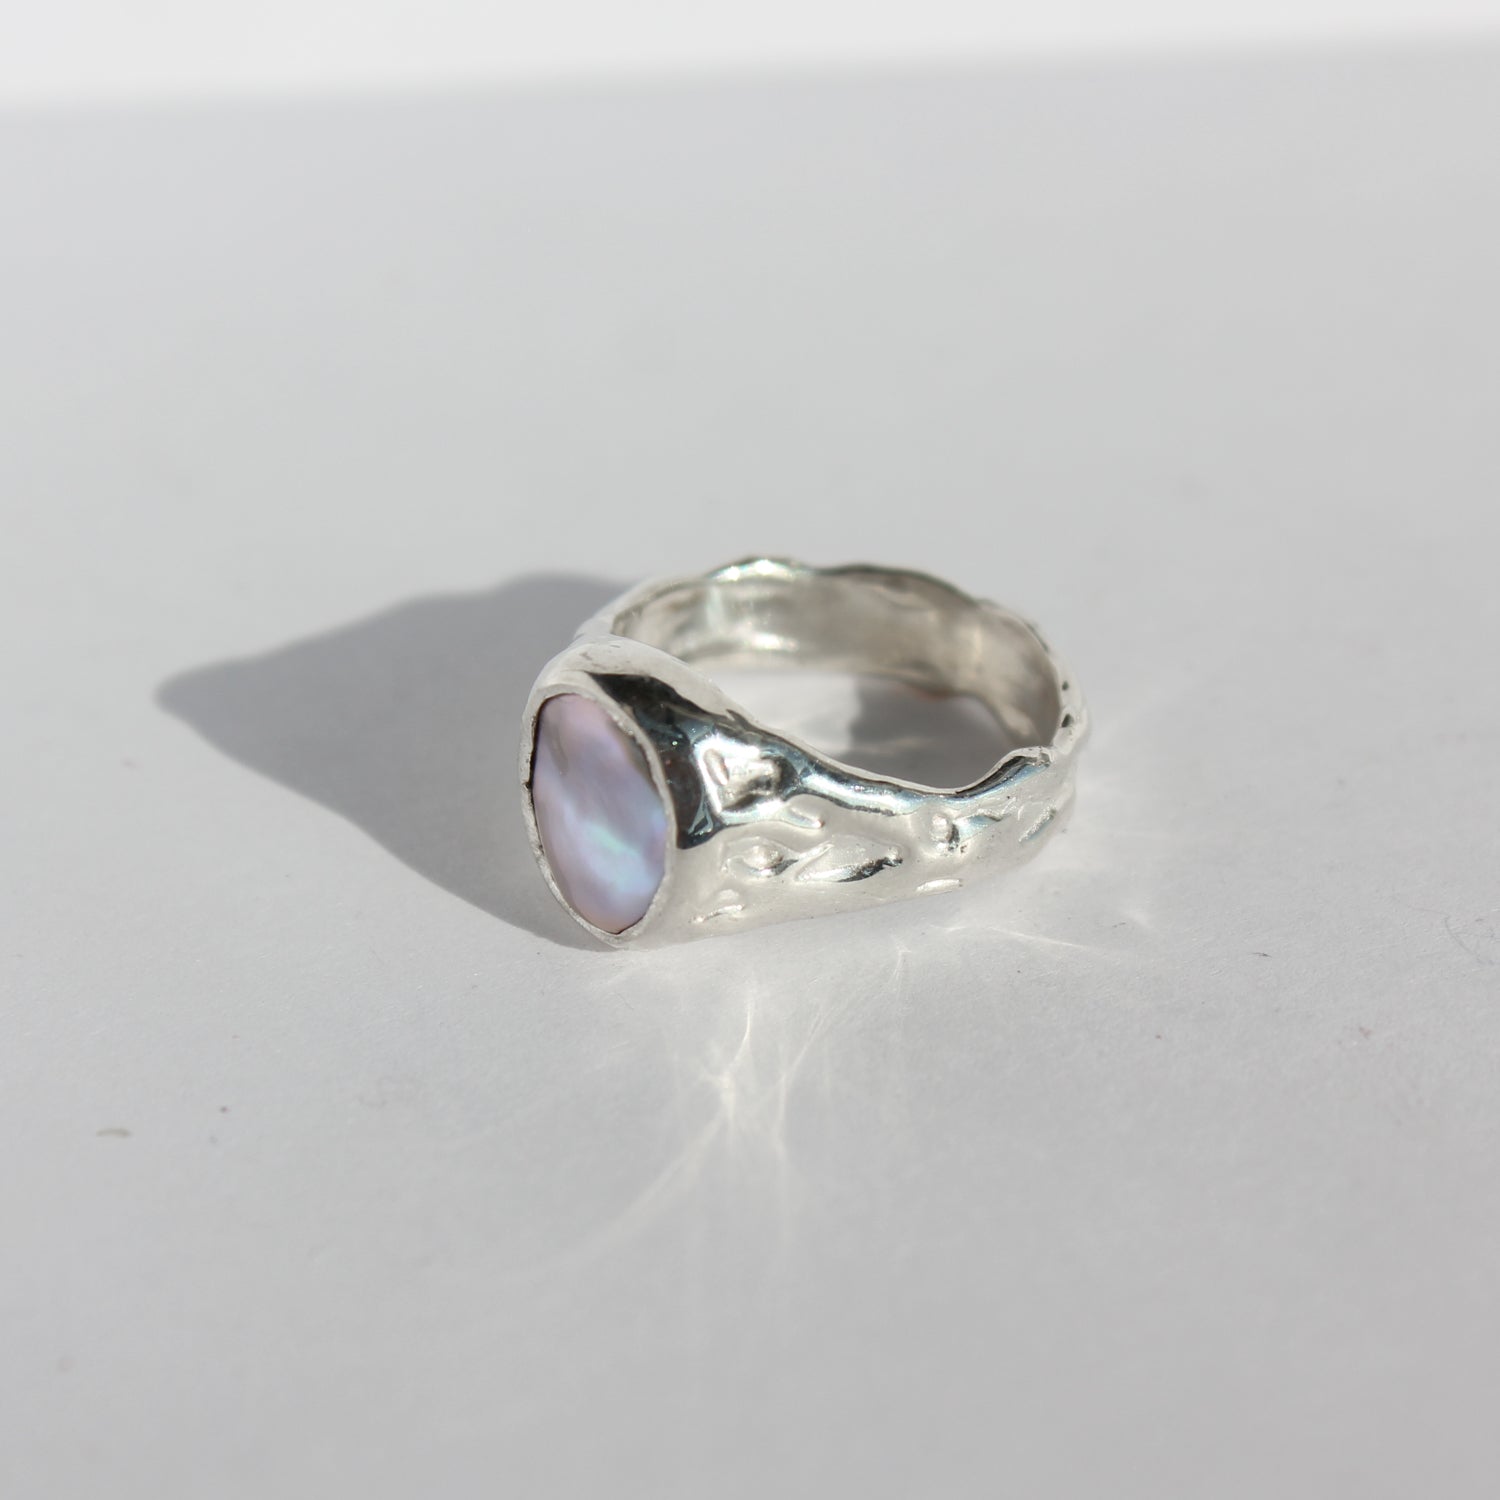 Pearl Crater Ring - Size 4.5